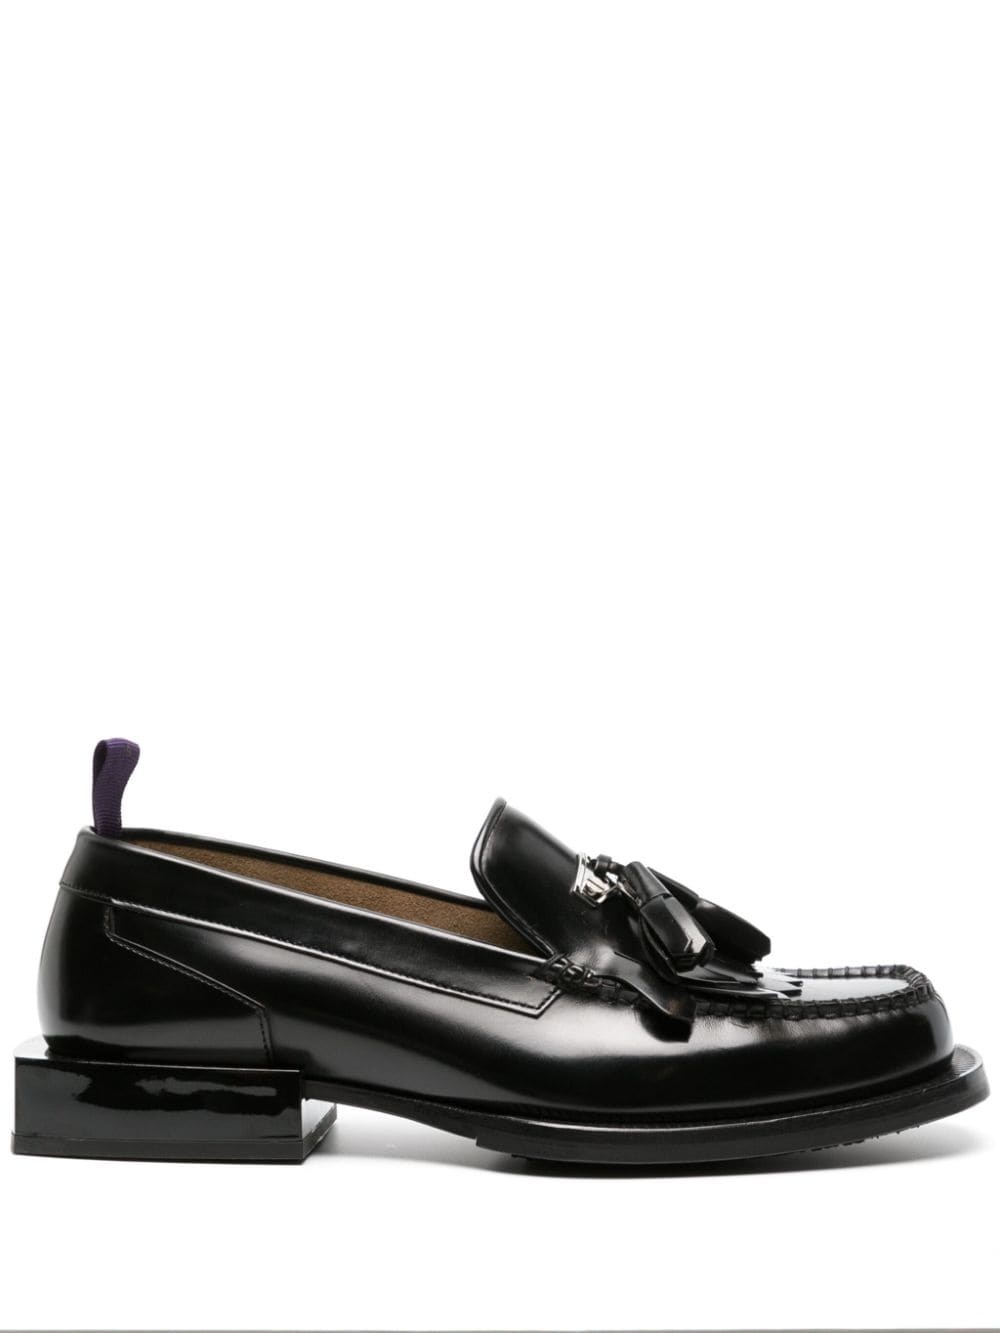 EYTYS Rio fringe-detail leather loafers | REVERSIBLE